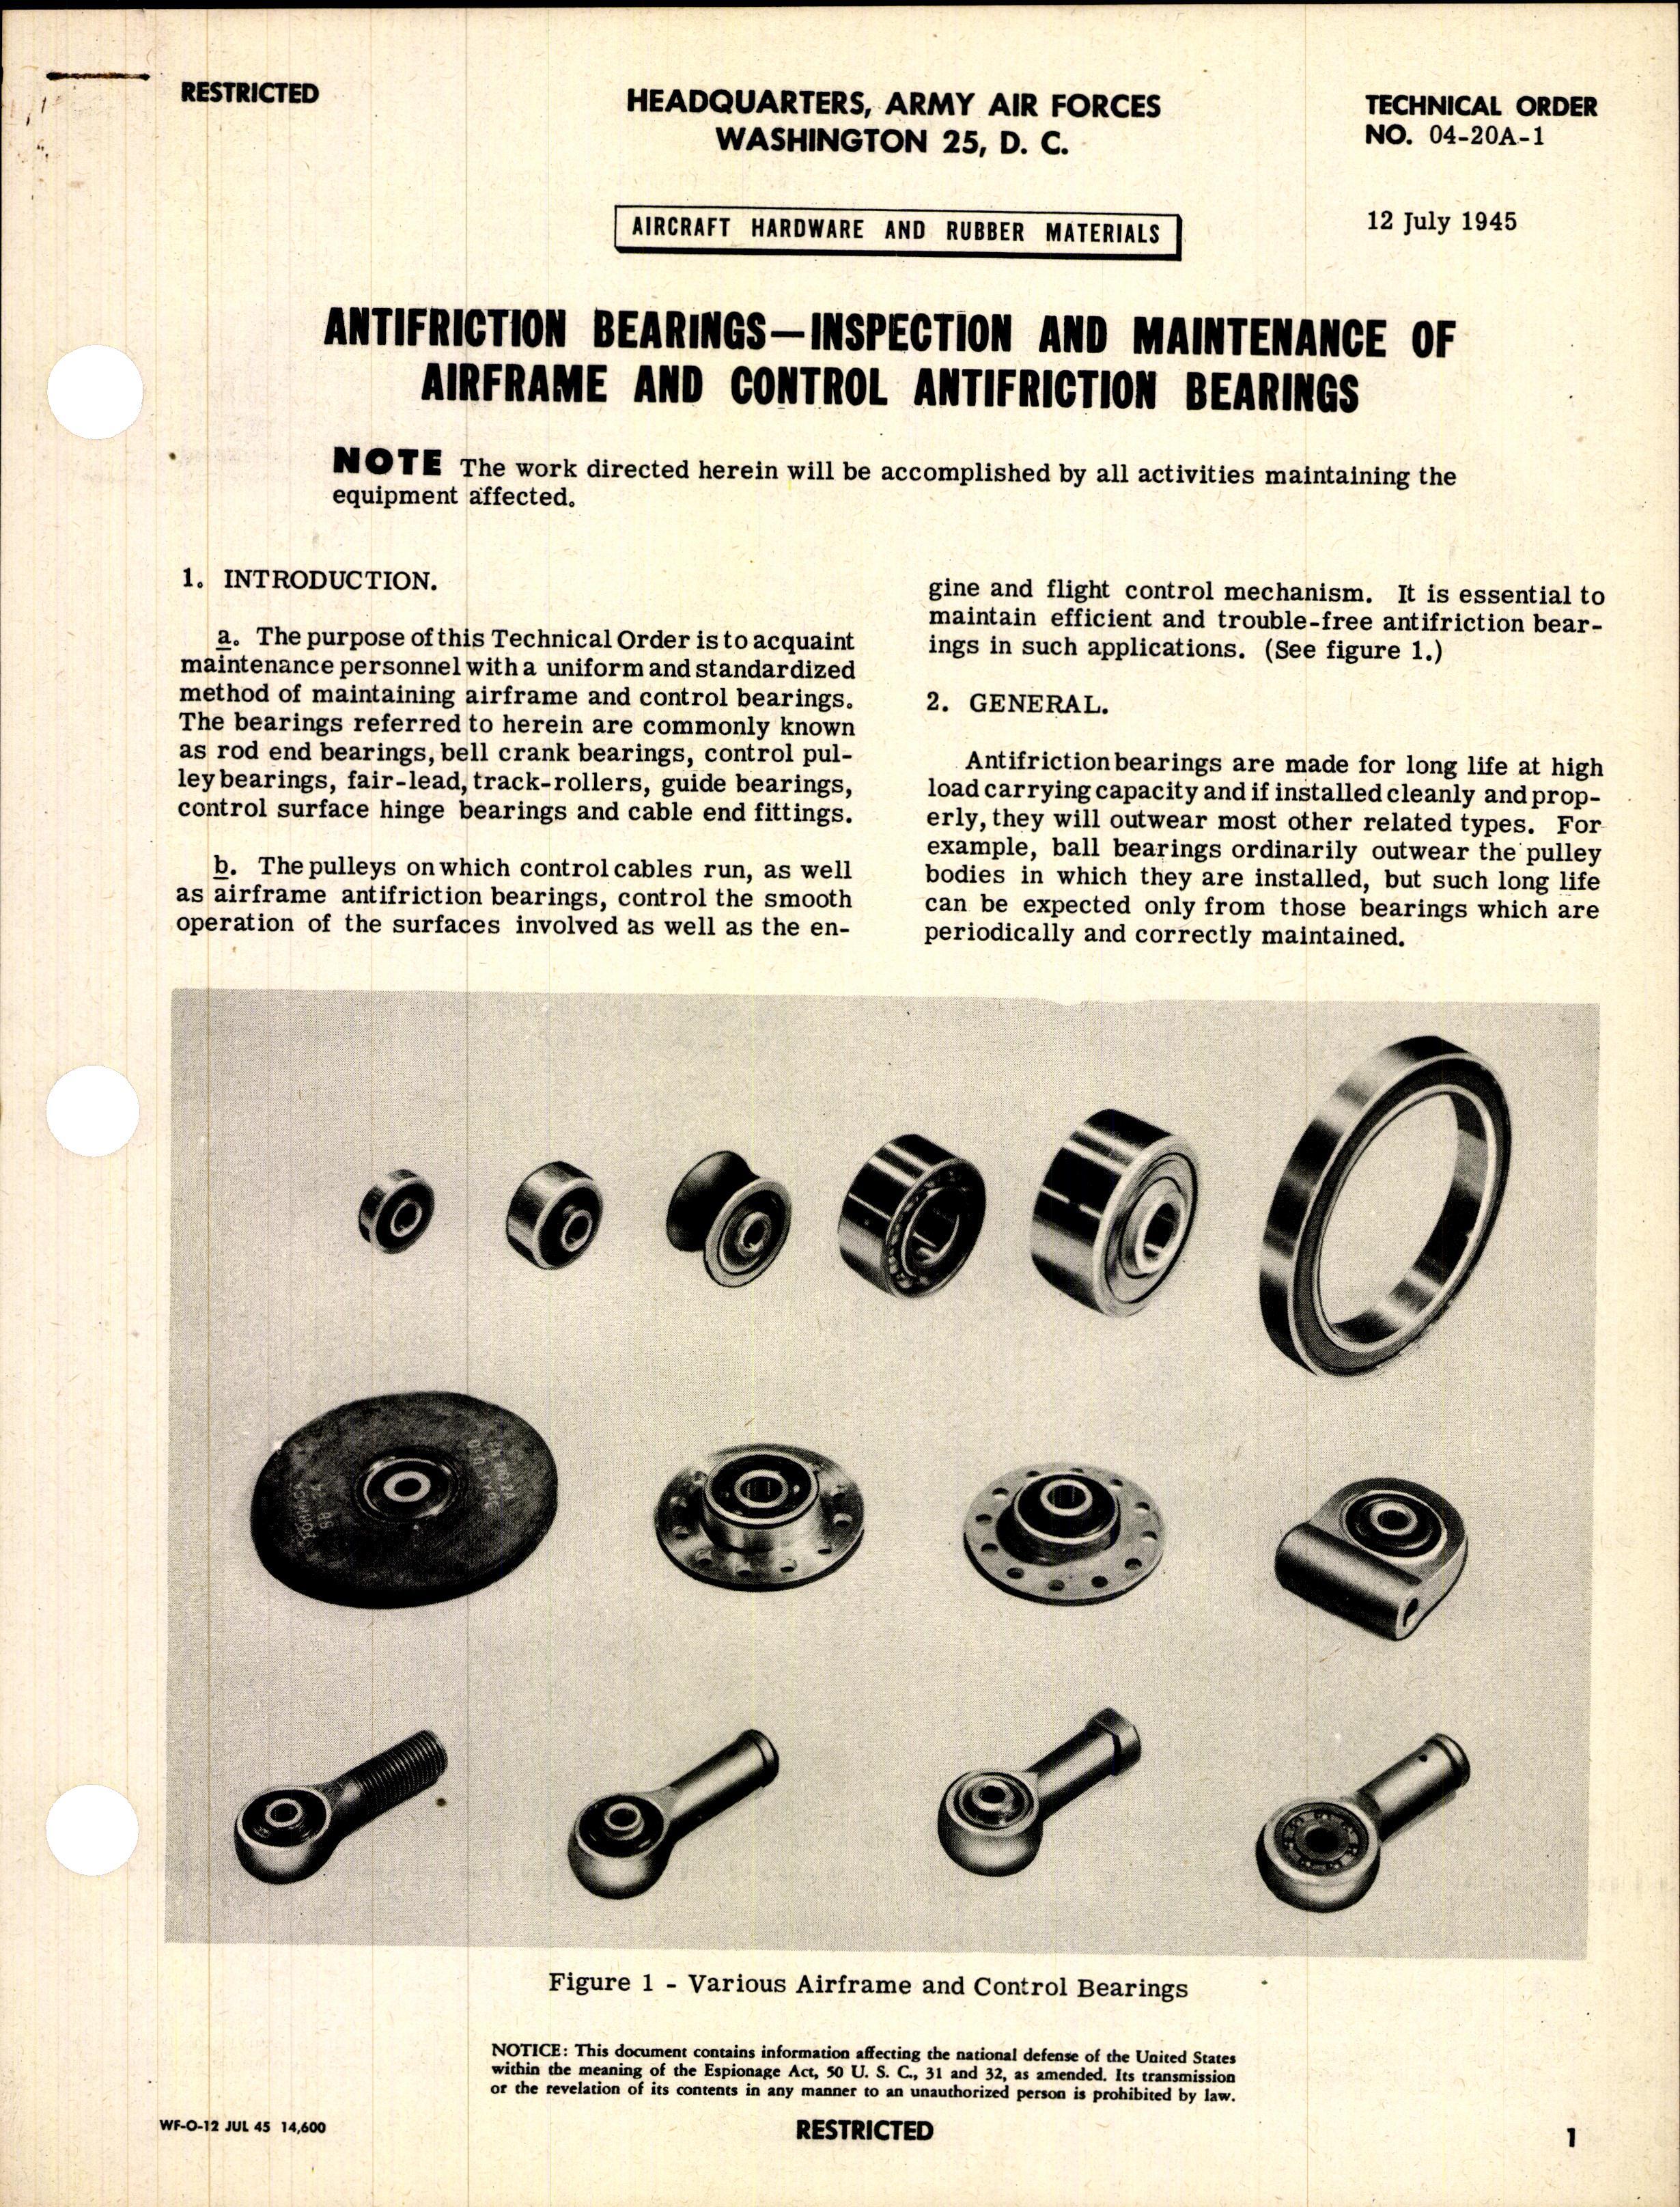 Sample page 1 from AirCorps Library document: Inspection and Maintenance of Airframe and Control Antifriction Bearings